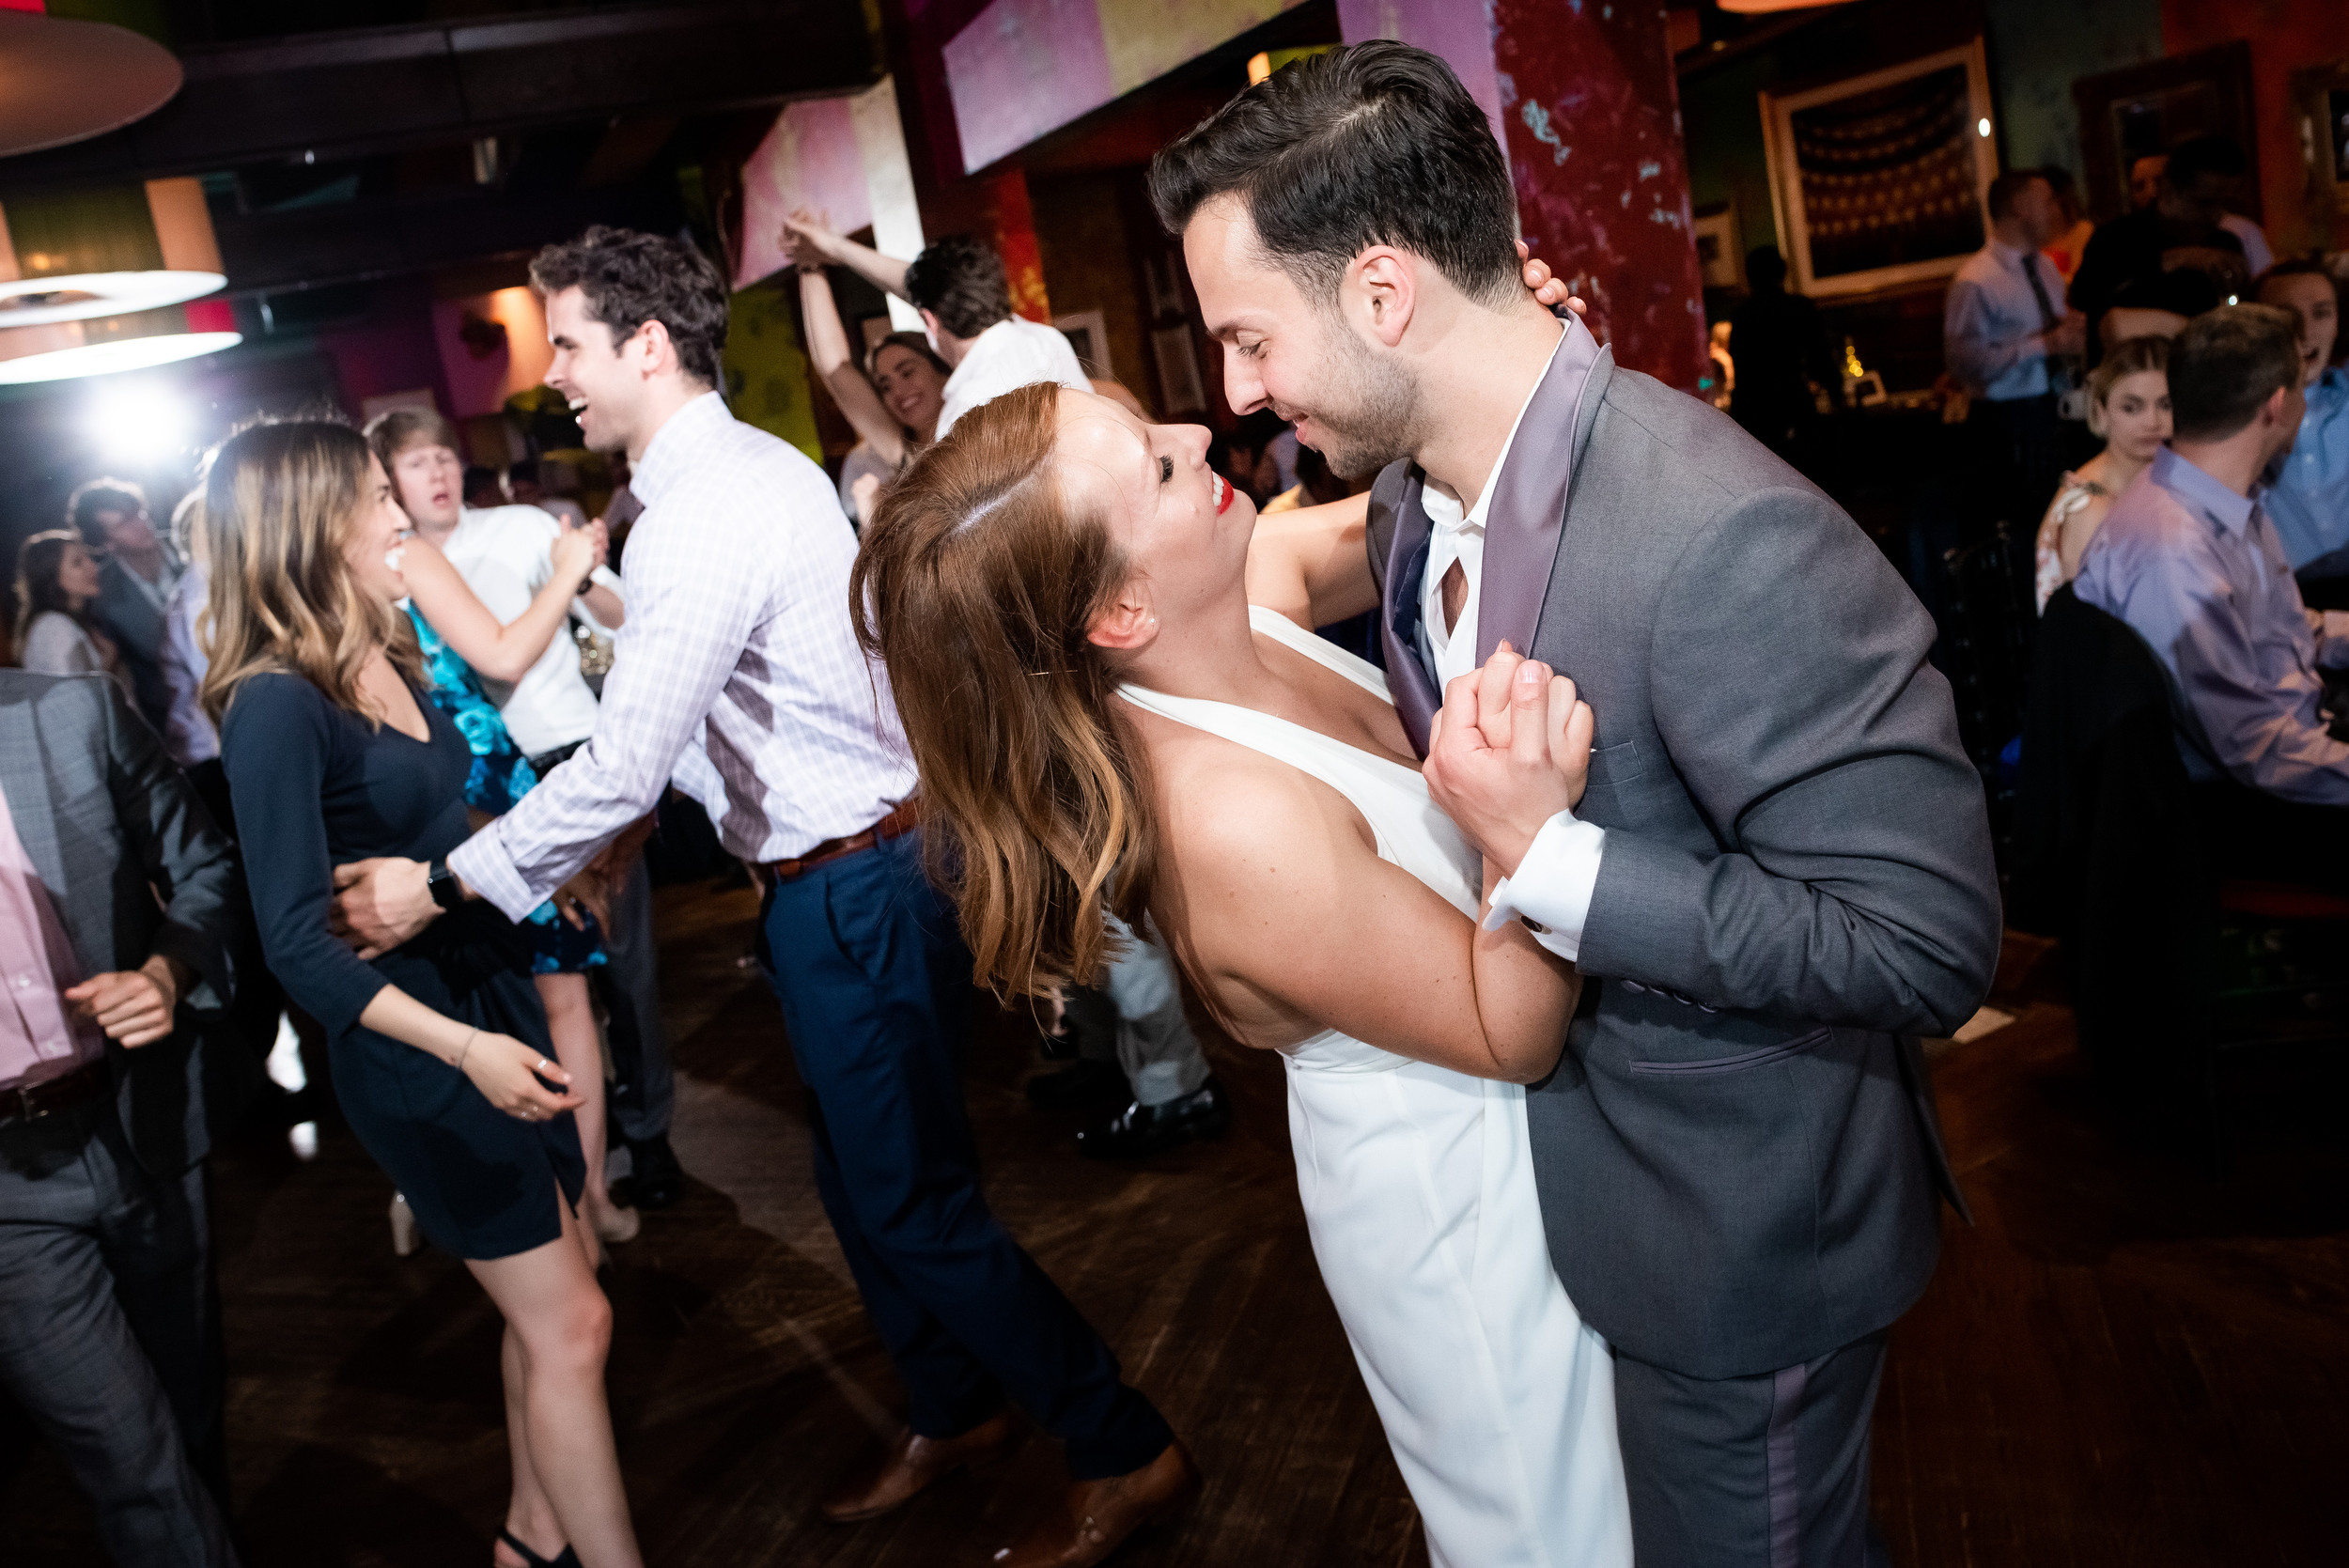 Chicago wedding photos: Carnivale Chicago wedding captured by J Brown Photography